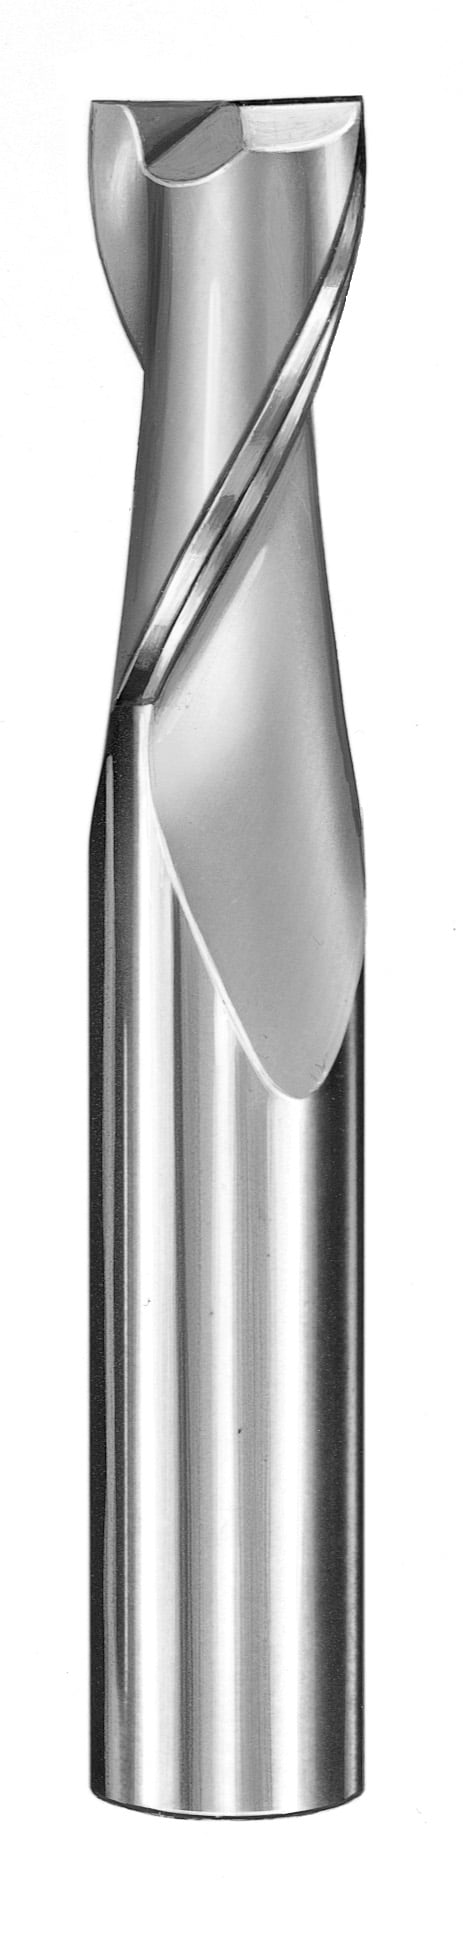 1/4" Dia, 2 Flute, Square End End Mill - 91278